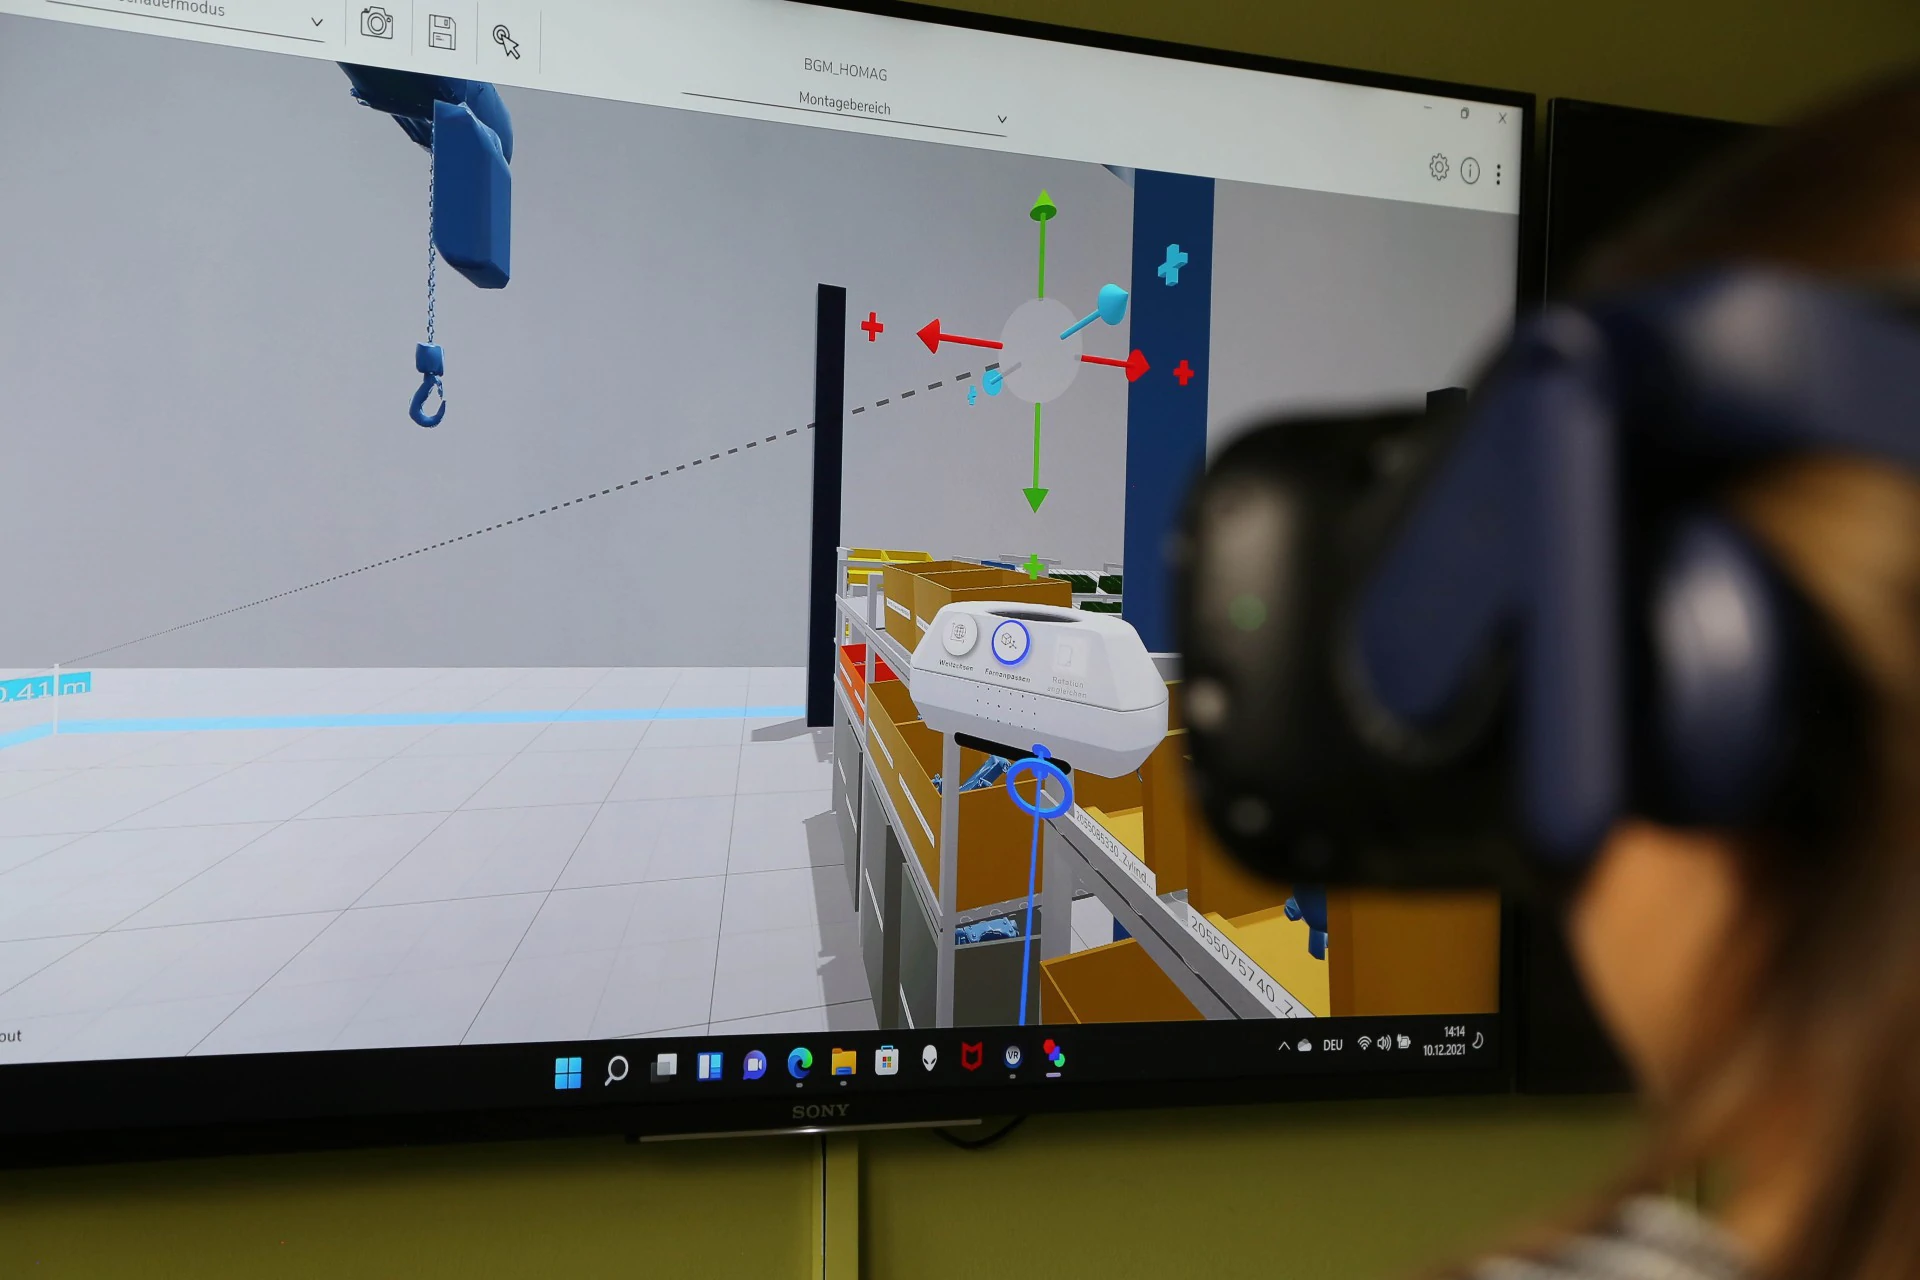 The workstations can be planned realistically and in detail in VR and depicted more realistically through models in 3D.